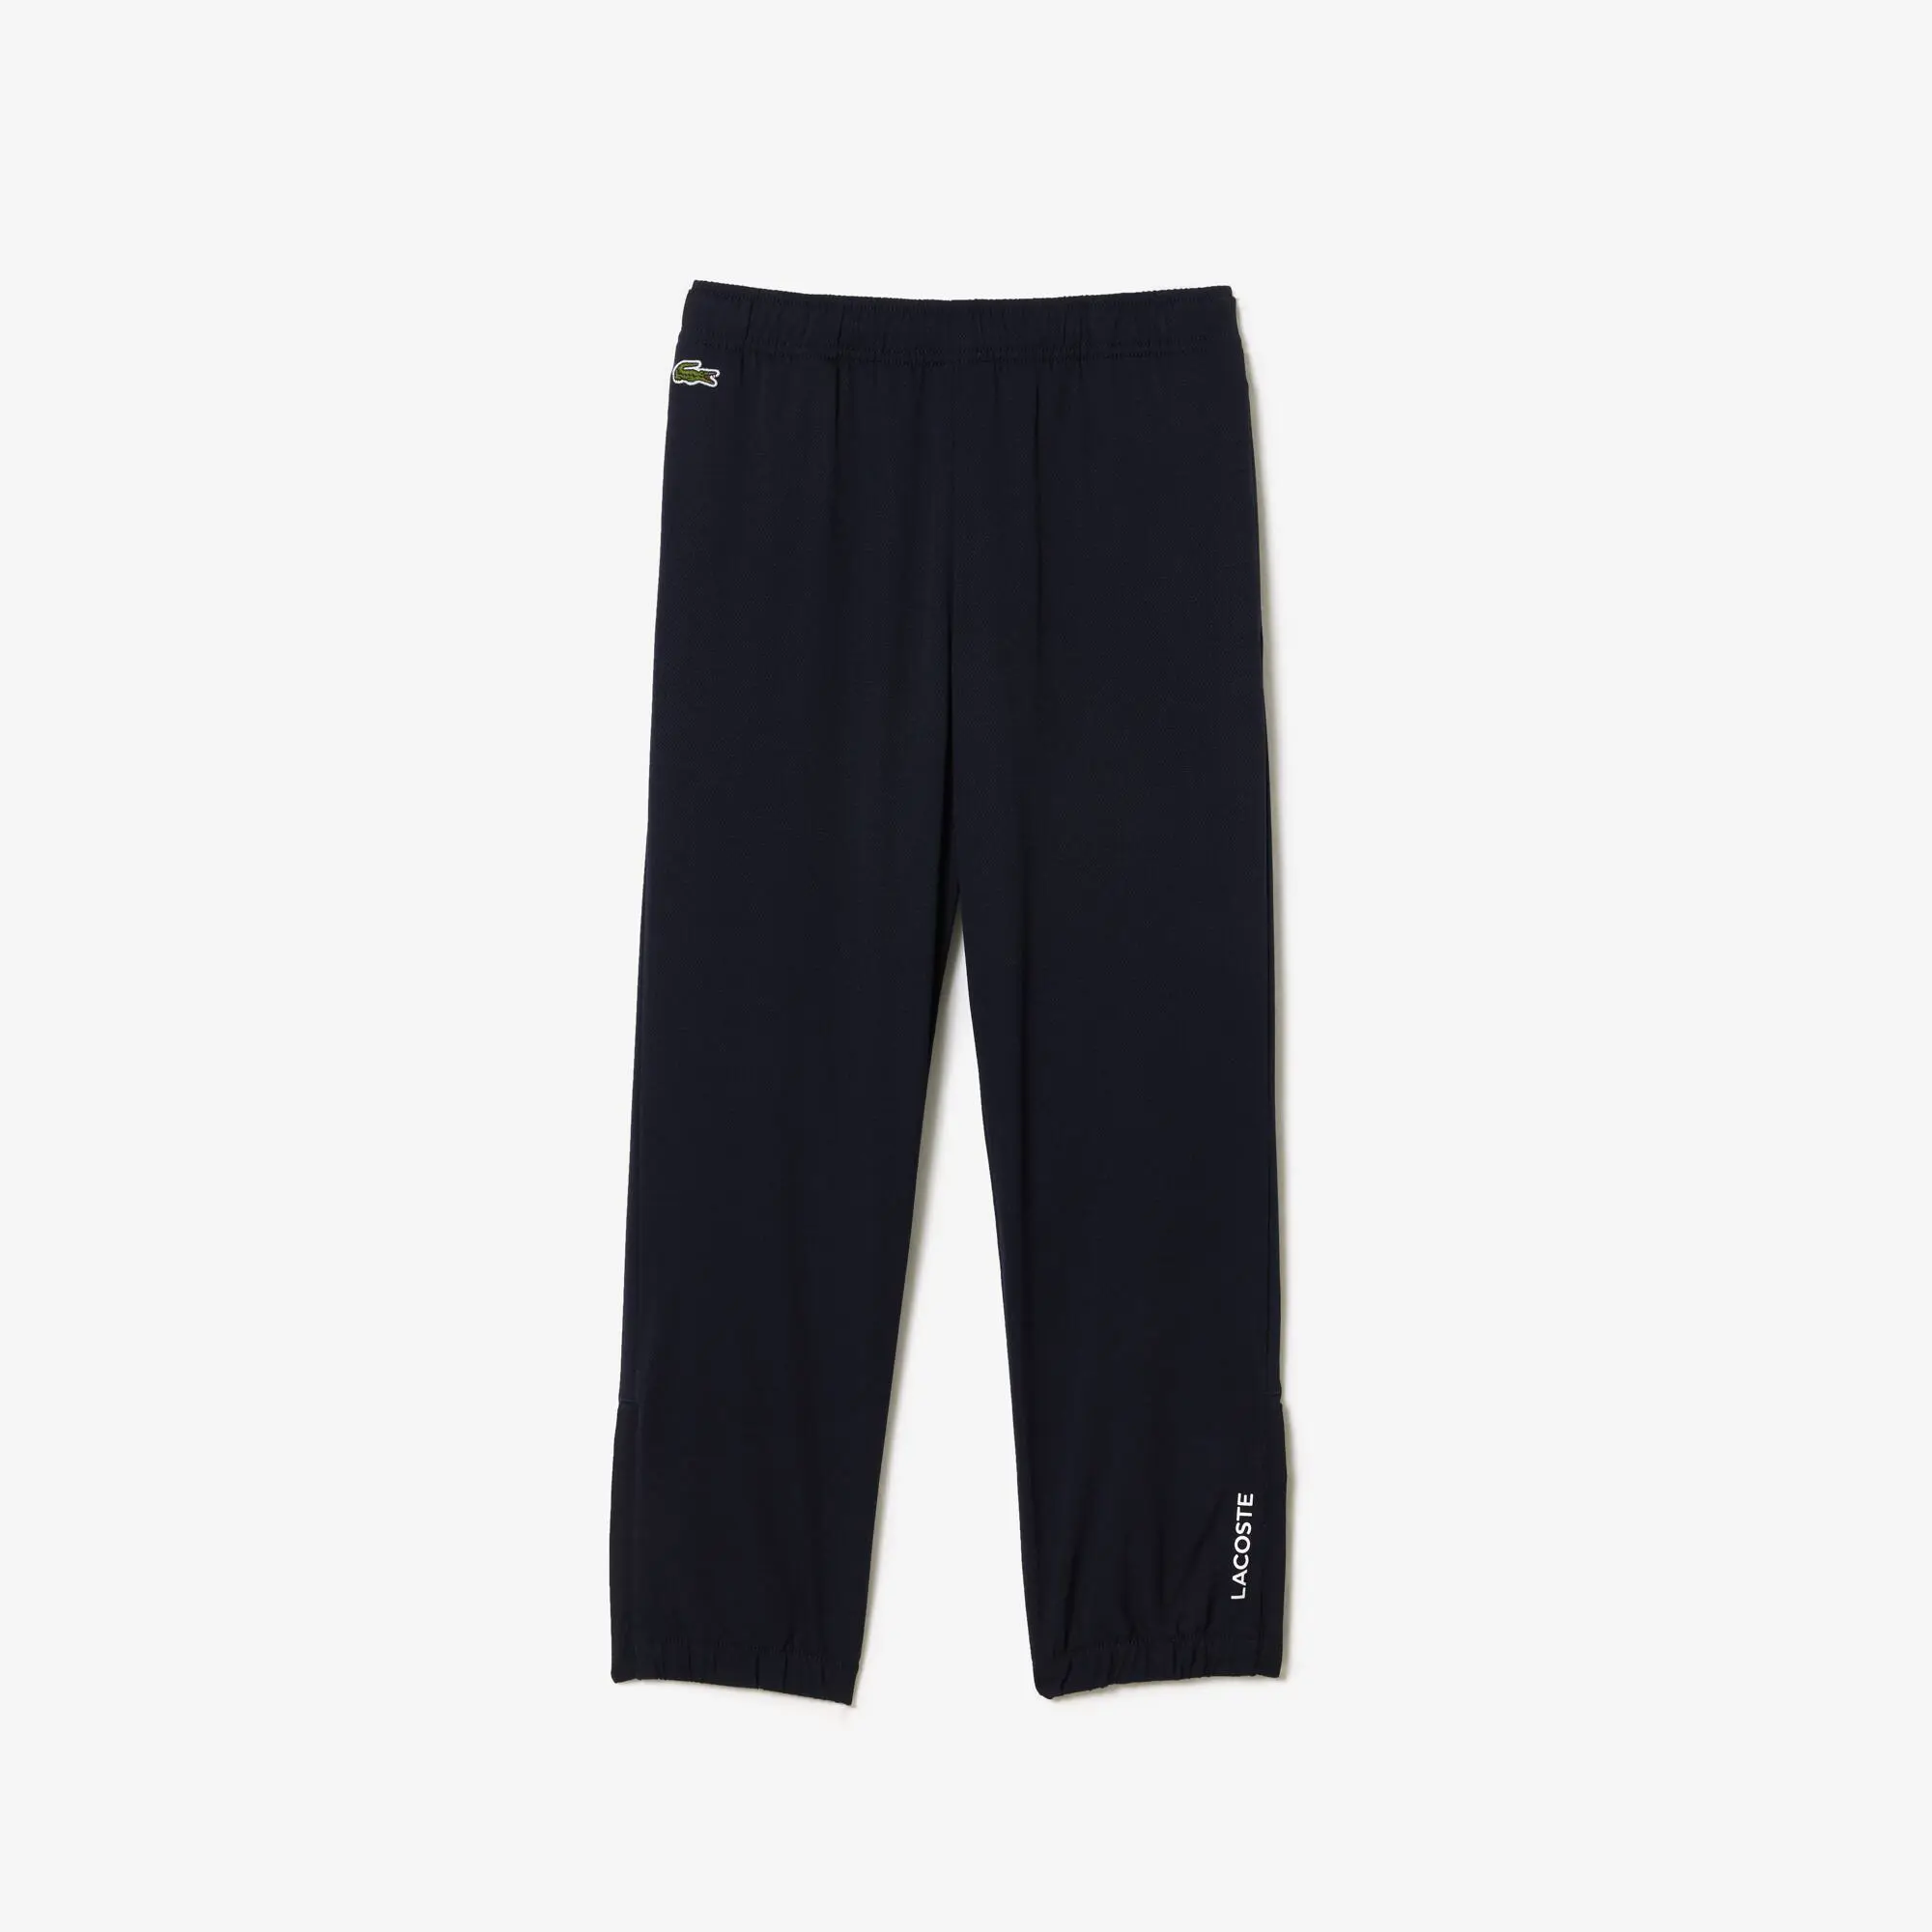 Lacoste Recycled Fiber Sport Track Pants. 2